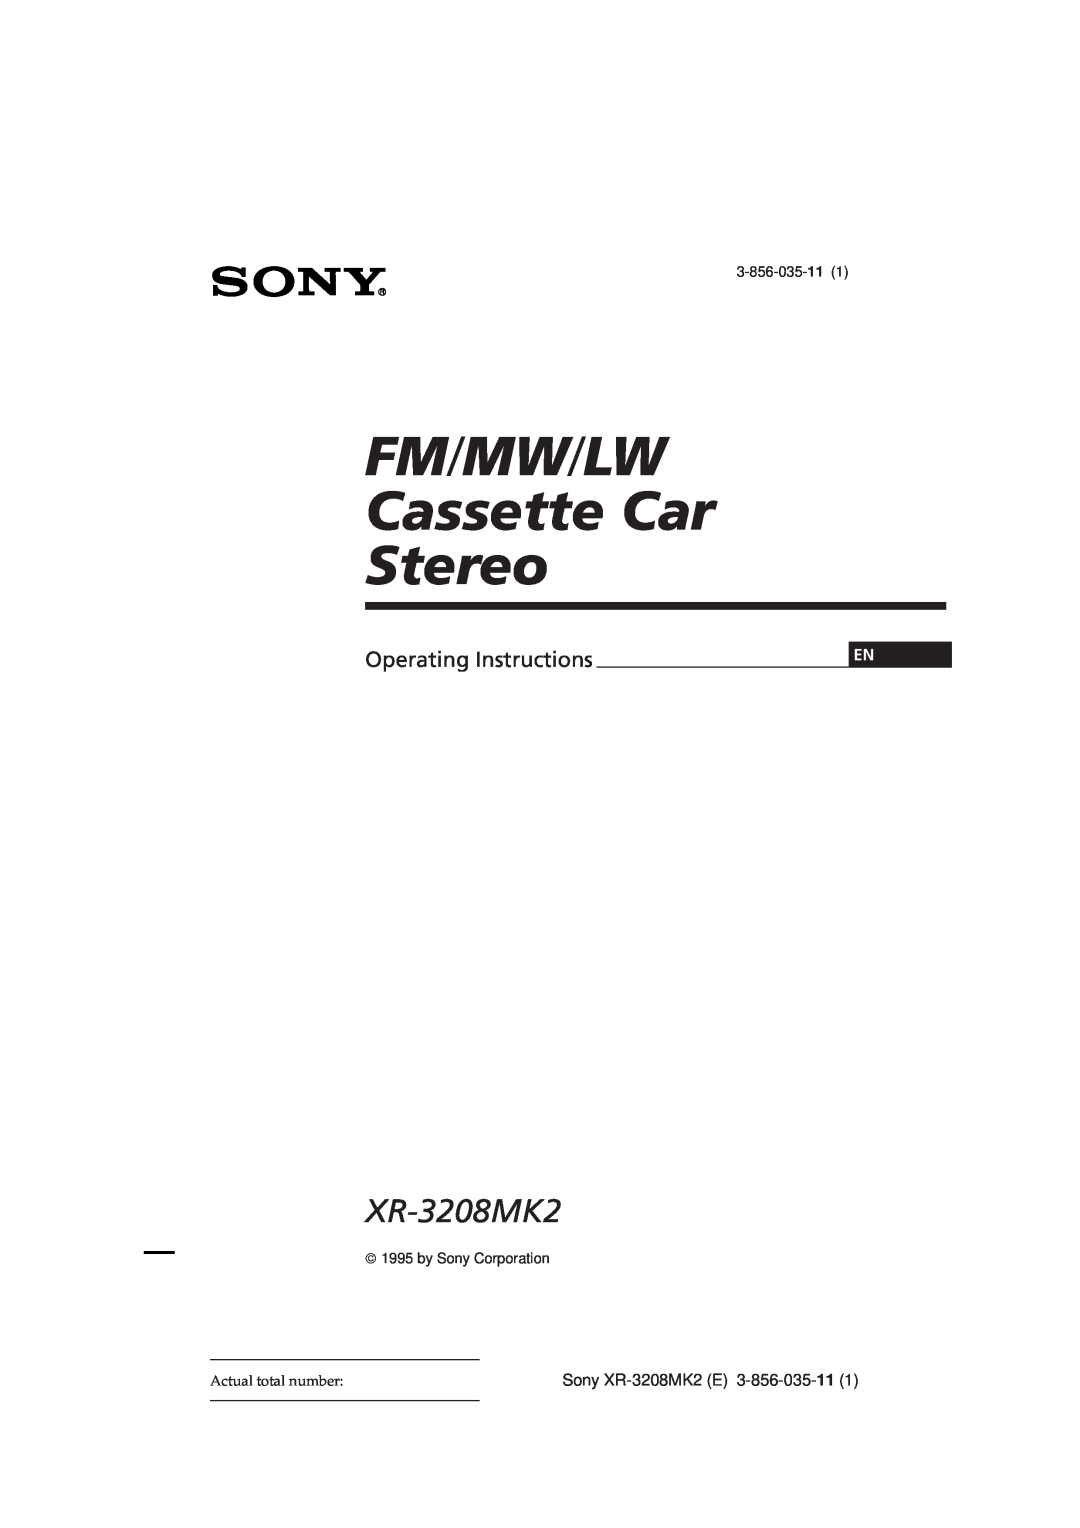 Sony operating instructions Sony XR-3208MK2 E, 3-856-035-11, by Sony Corporation, FM/MW/LW Cassette Car Stereo 